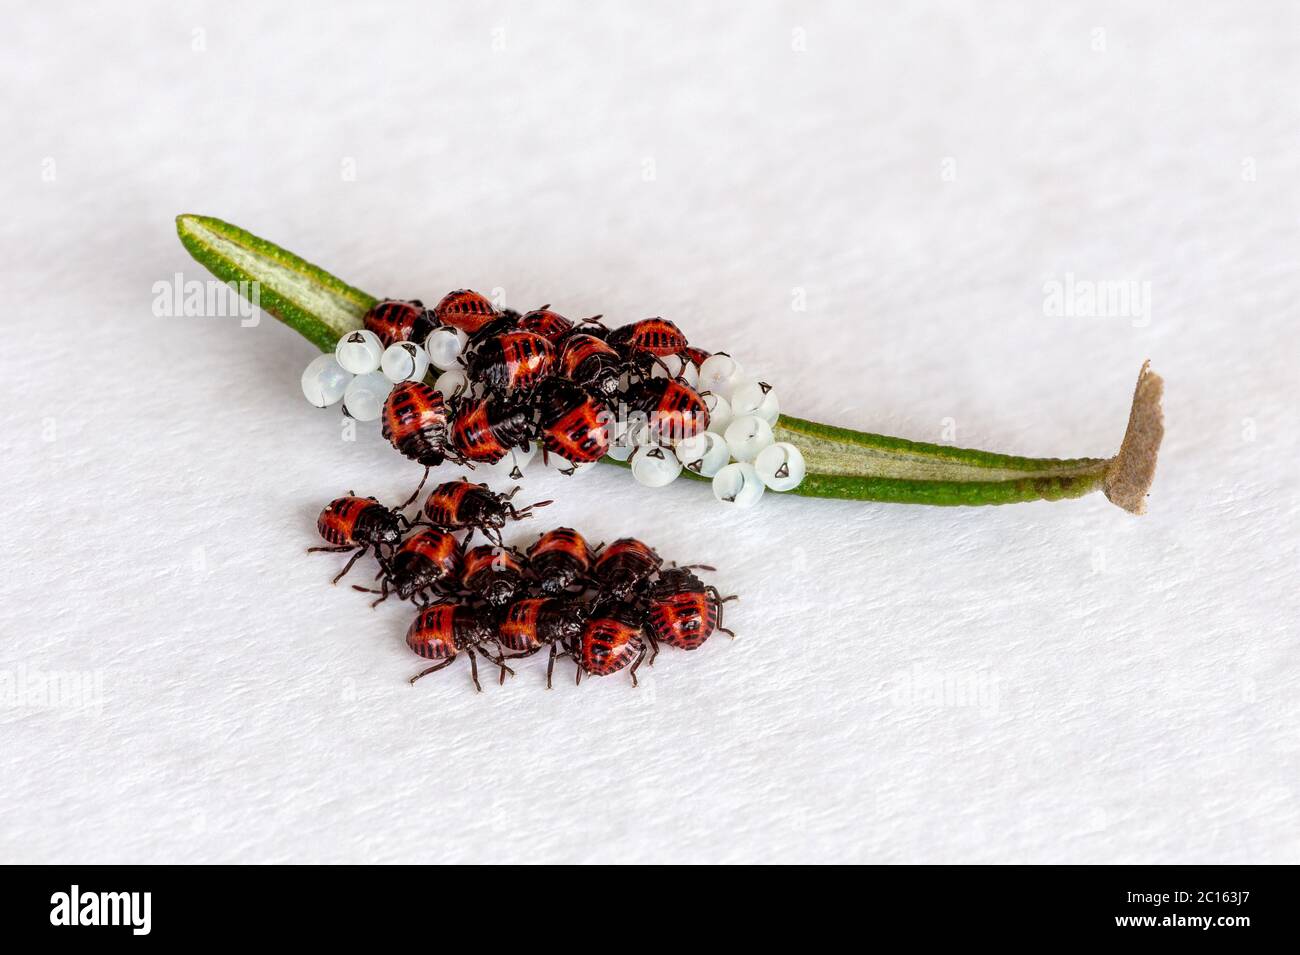 Hatch eggs and young newborn bedbugs (orange, red) (Halyomorpha halys) over a rosemary leaf. East Asian native insect. Stock Photo